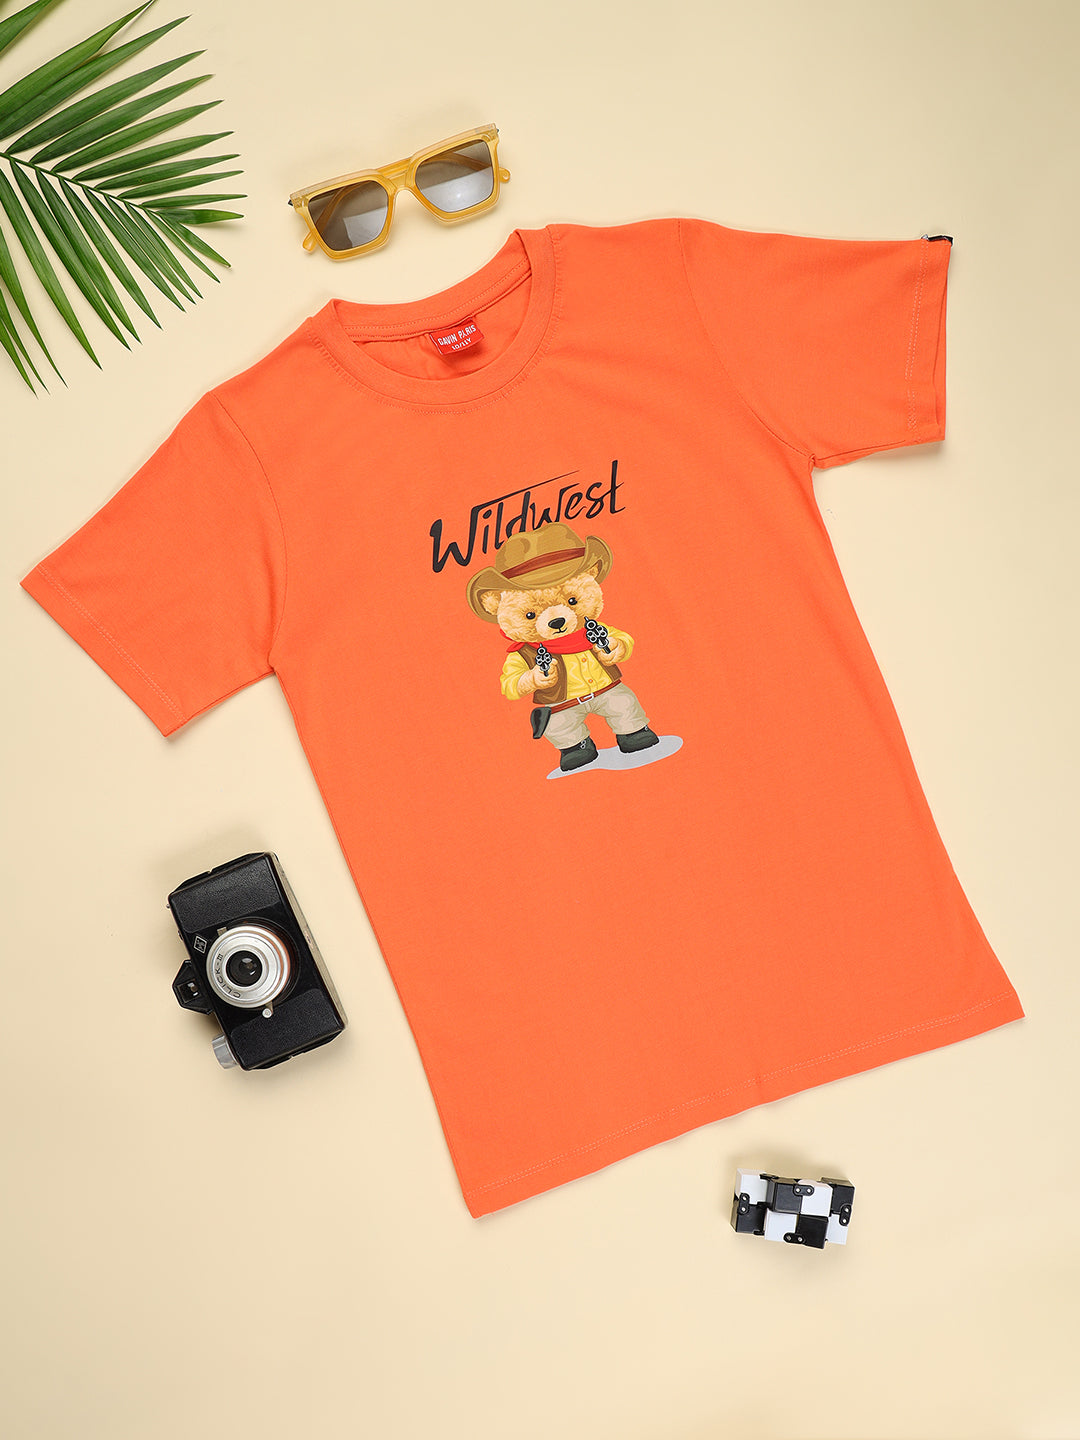 Wildest T-shirts for Boys & Girls